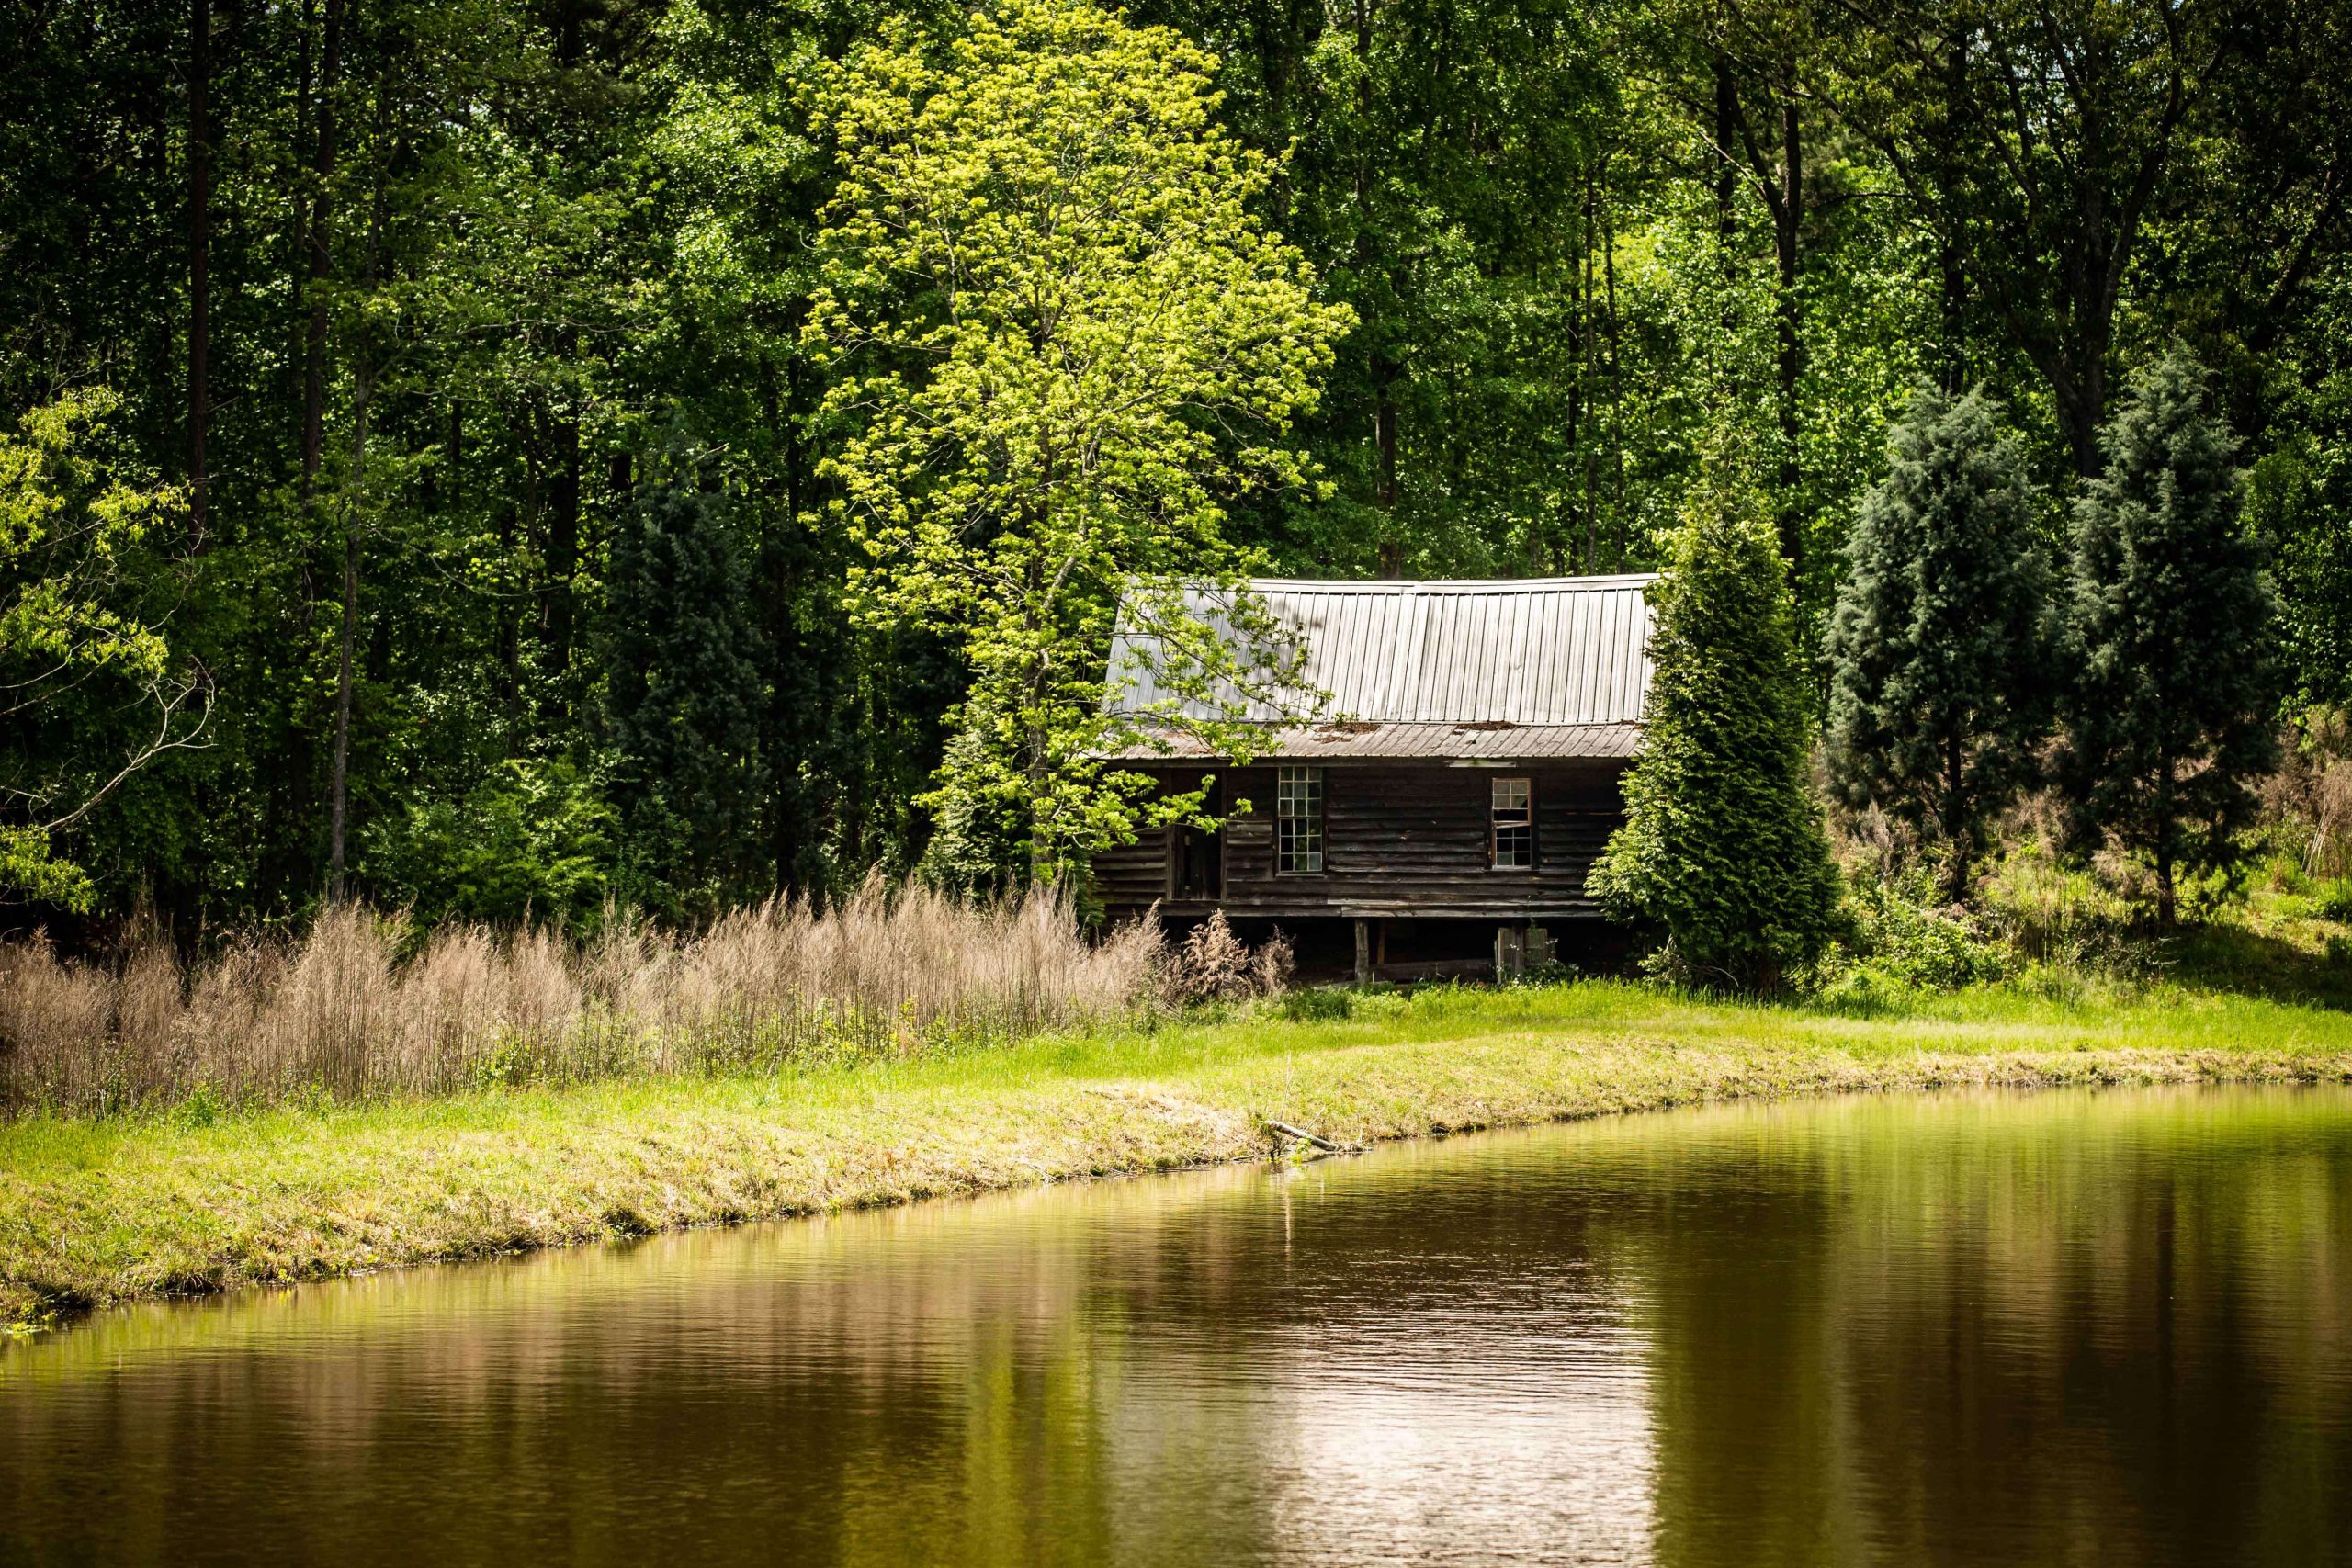 There is a cool, secluded cabin on the shores of one of the farm ponds. 